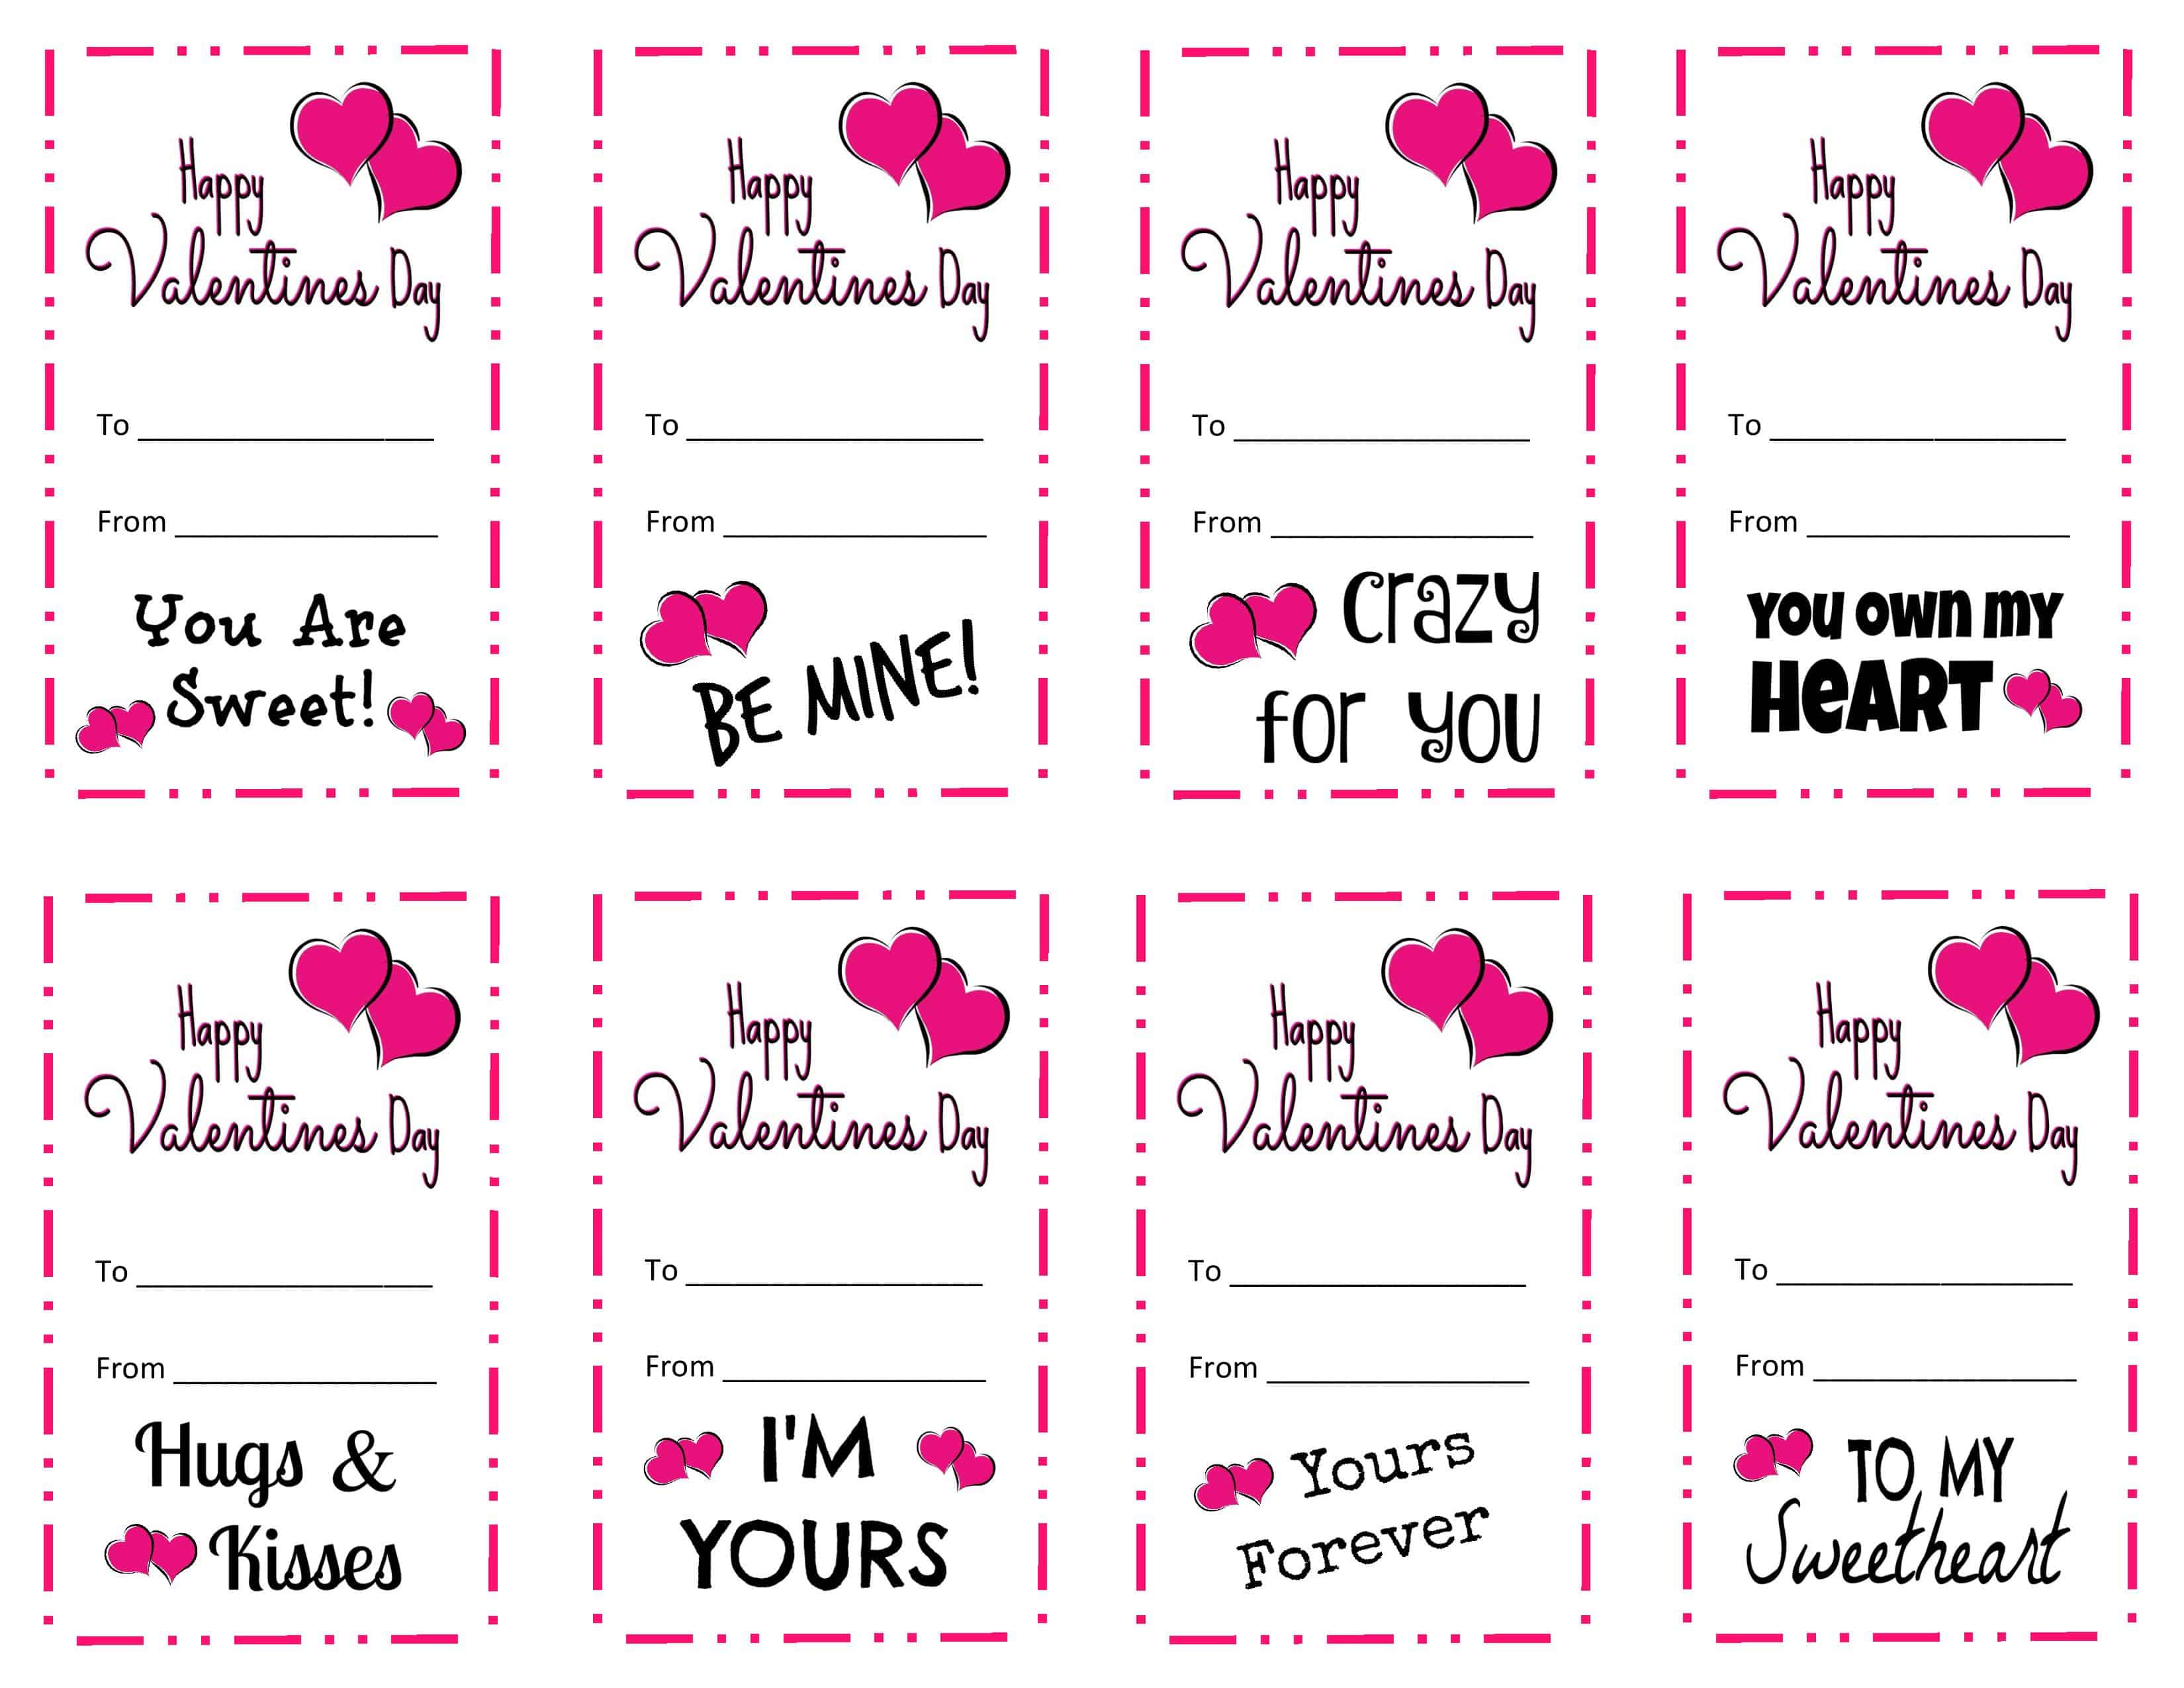 These Free Printable Valentines are so cute and affordable! With 8 different sayings, you are sure to find the perfect one for all of your sweethearts.